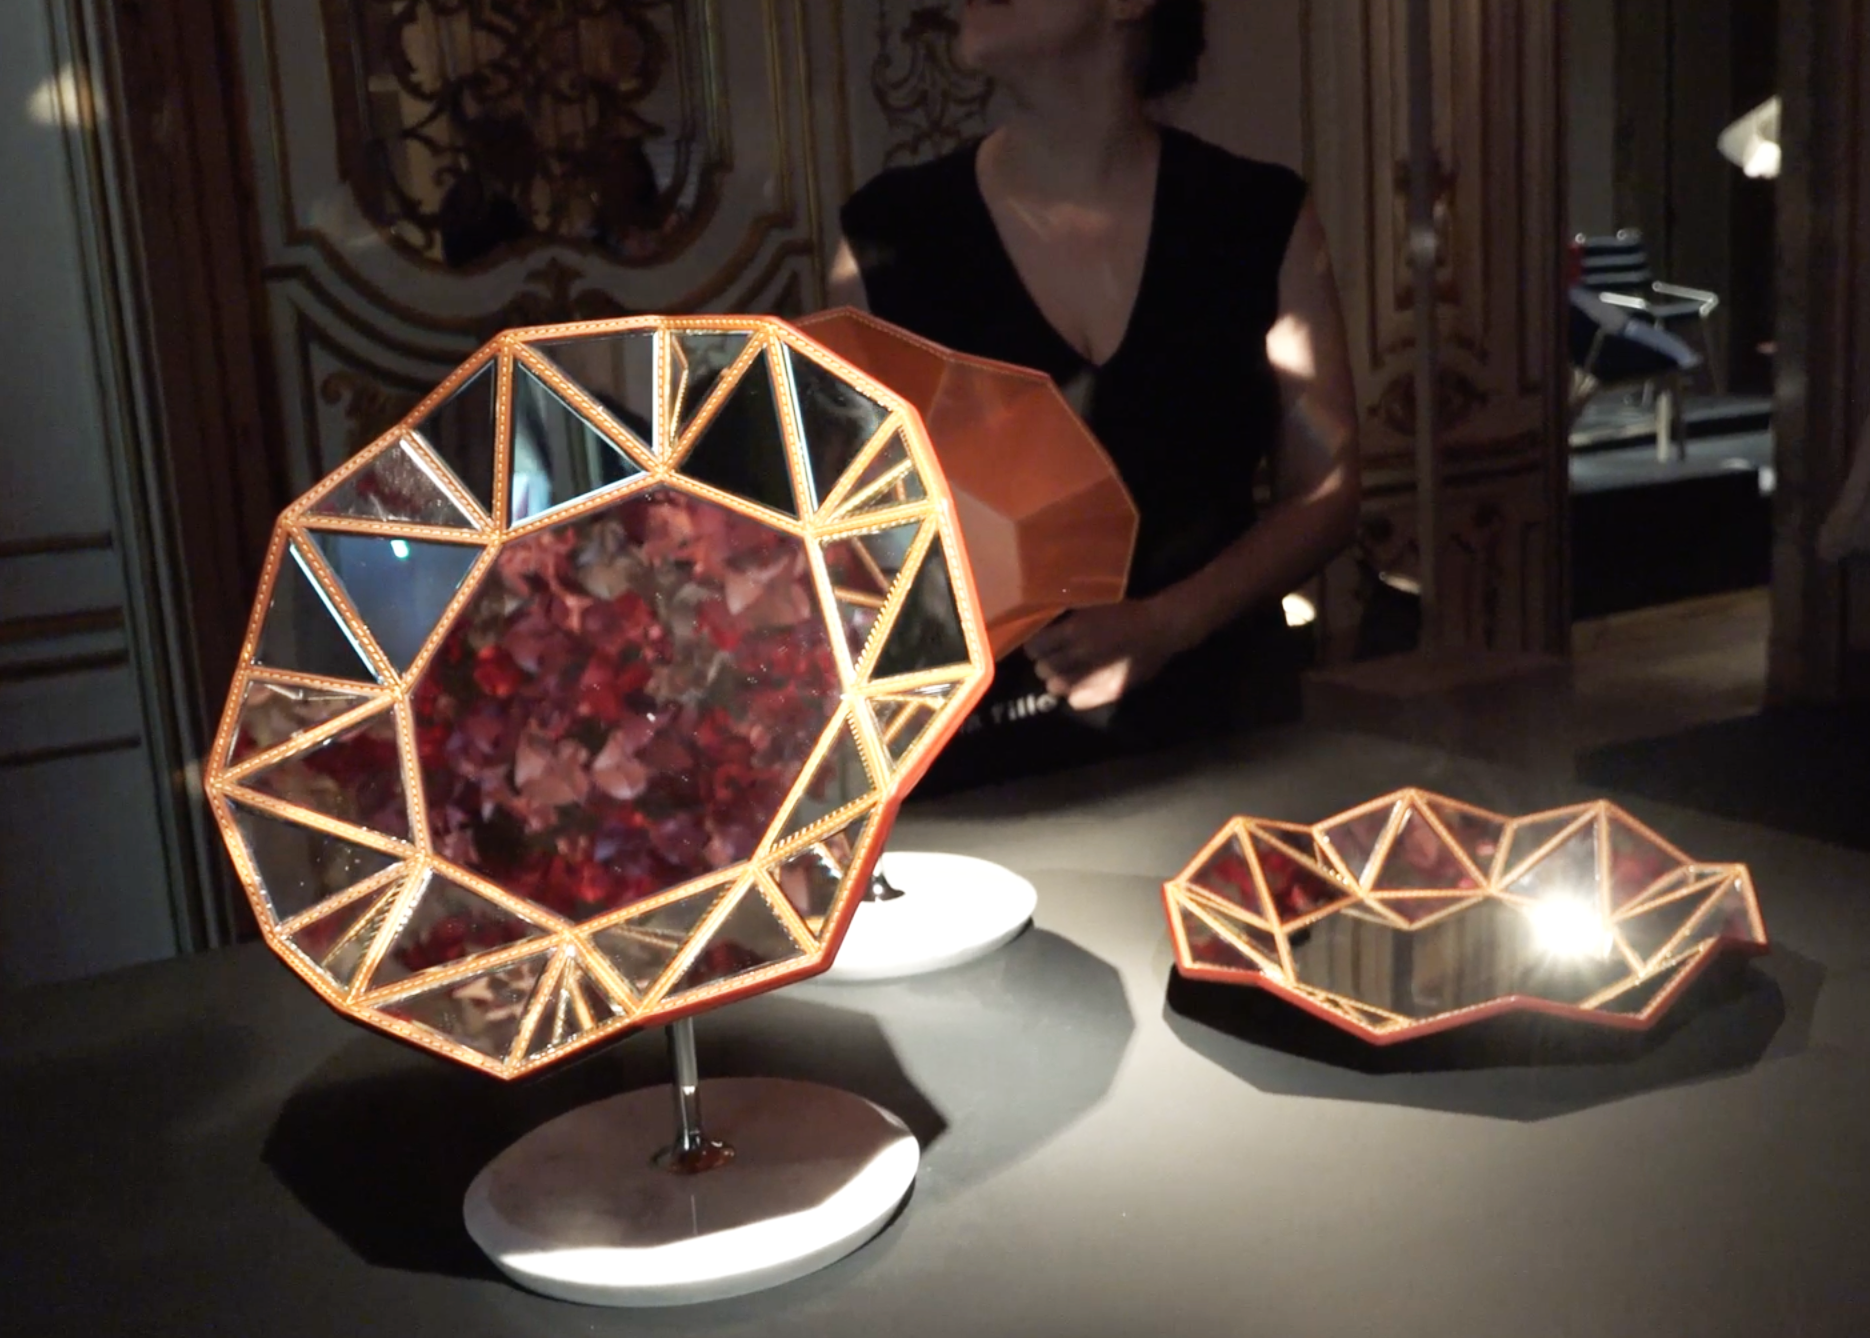 Marcel Wanders' Diamond Mirror for Les Petits Nomades by Louis Vuitton